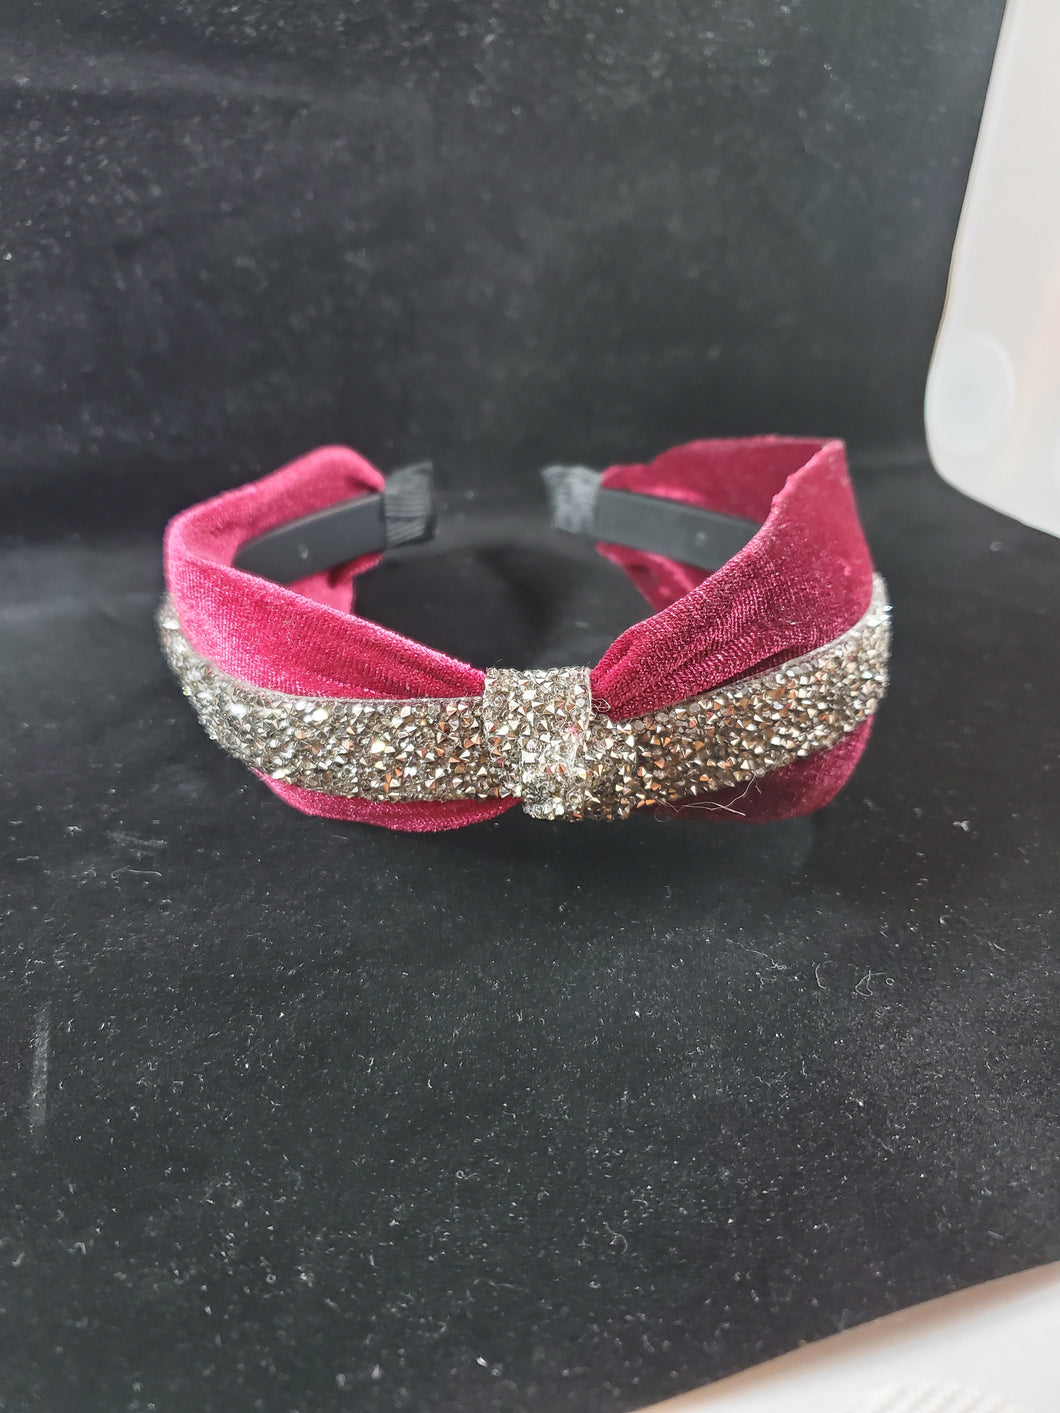 Red Felt Headband with Silver and Black Rhinestones - Unique Inspirations by Tracy and Anna